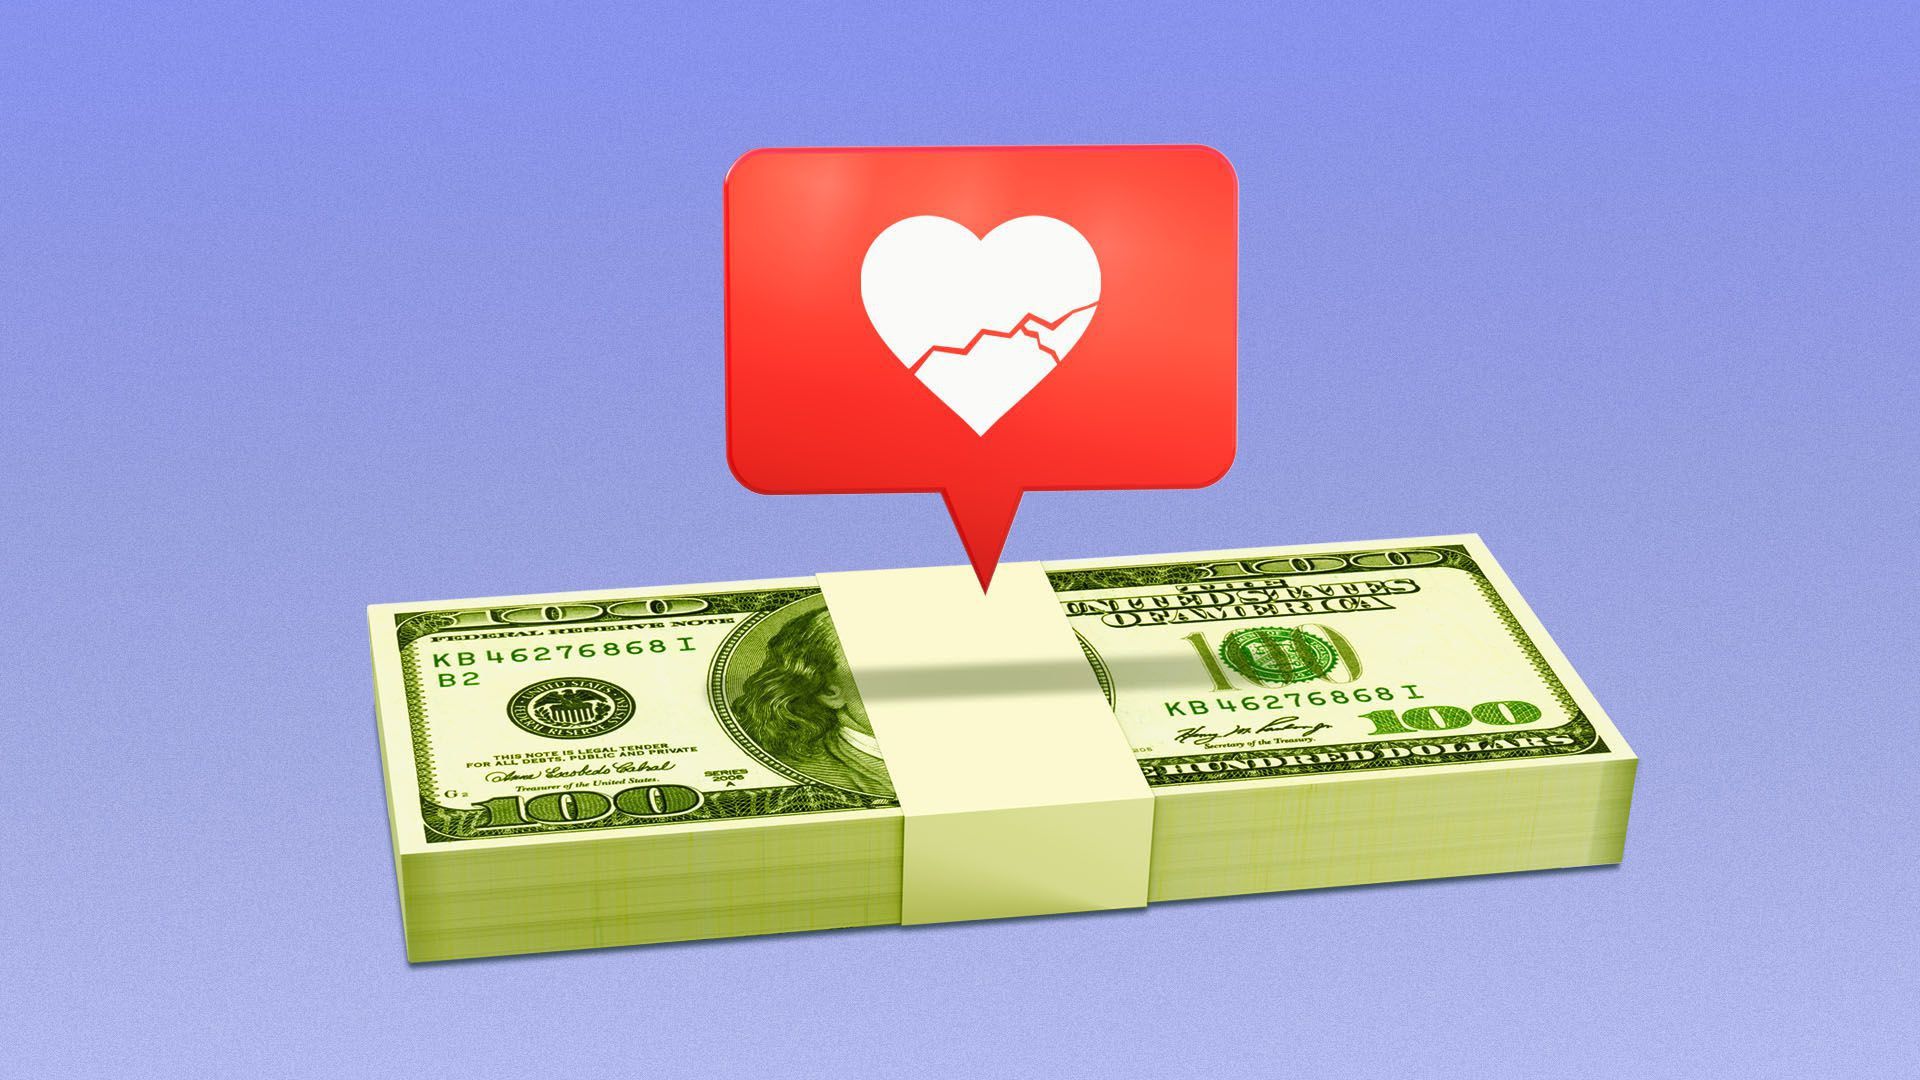 A message pop-up emoji of a breaking heart over a stack of cash